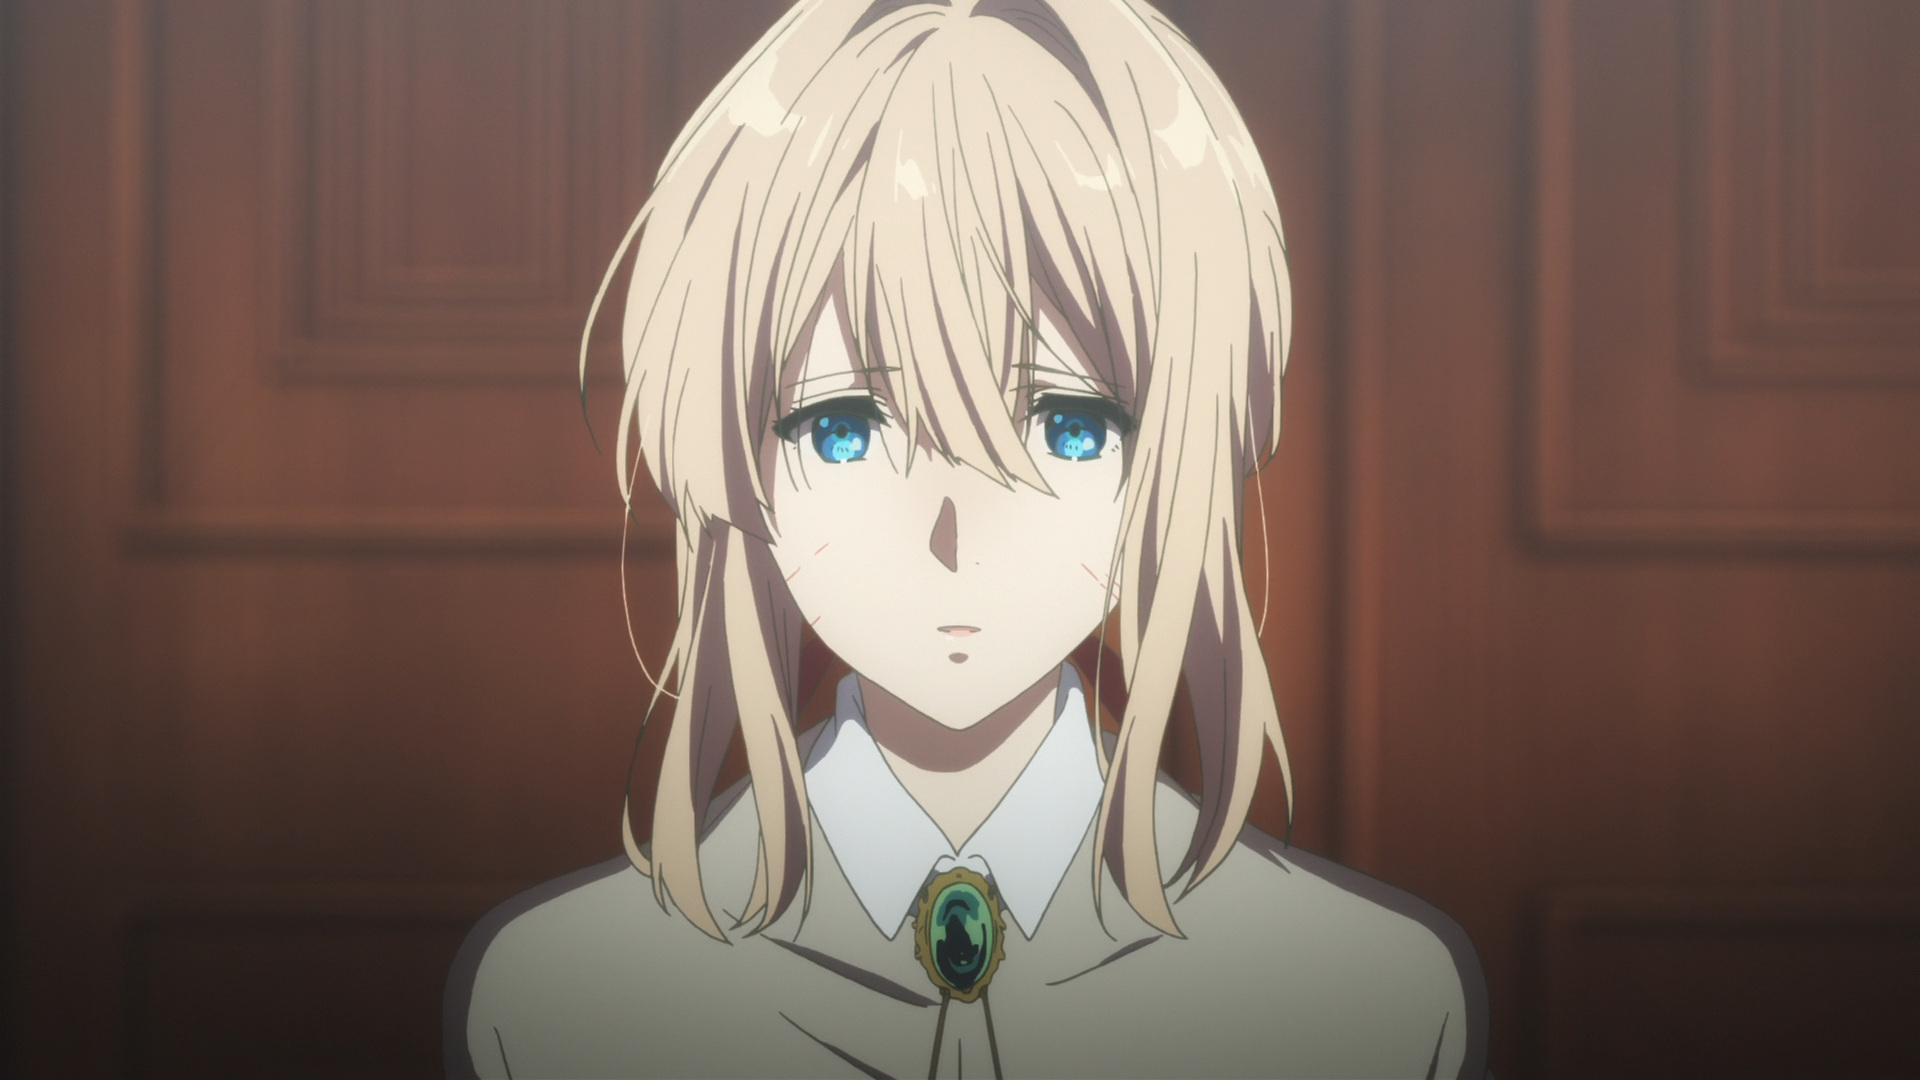 Among all the shows I’ve had the pleasure of reviewing, Violet Evergarden h...